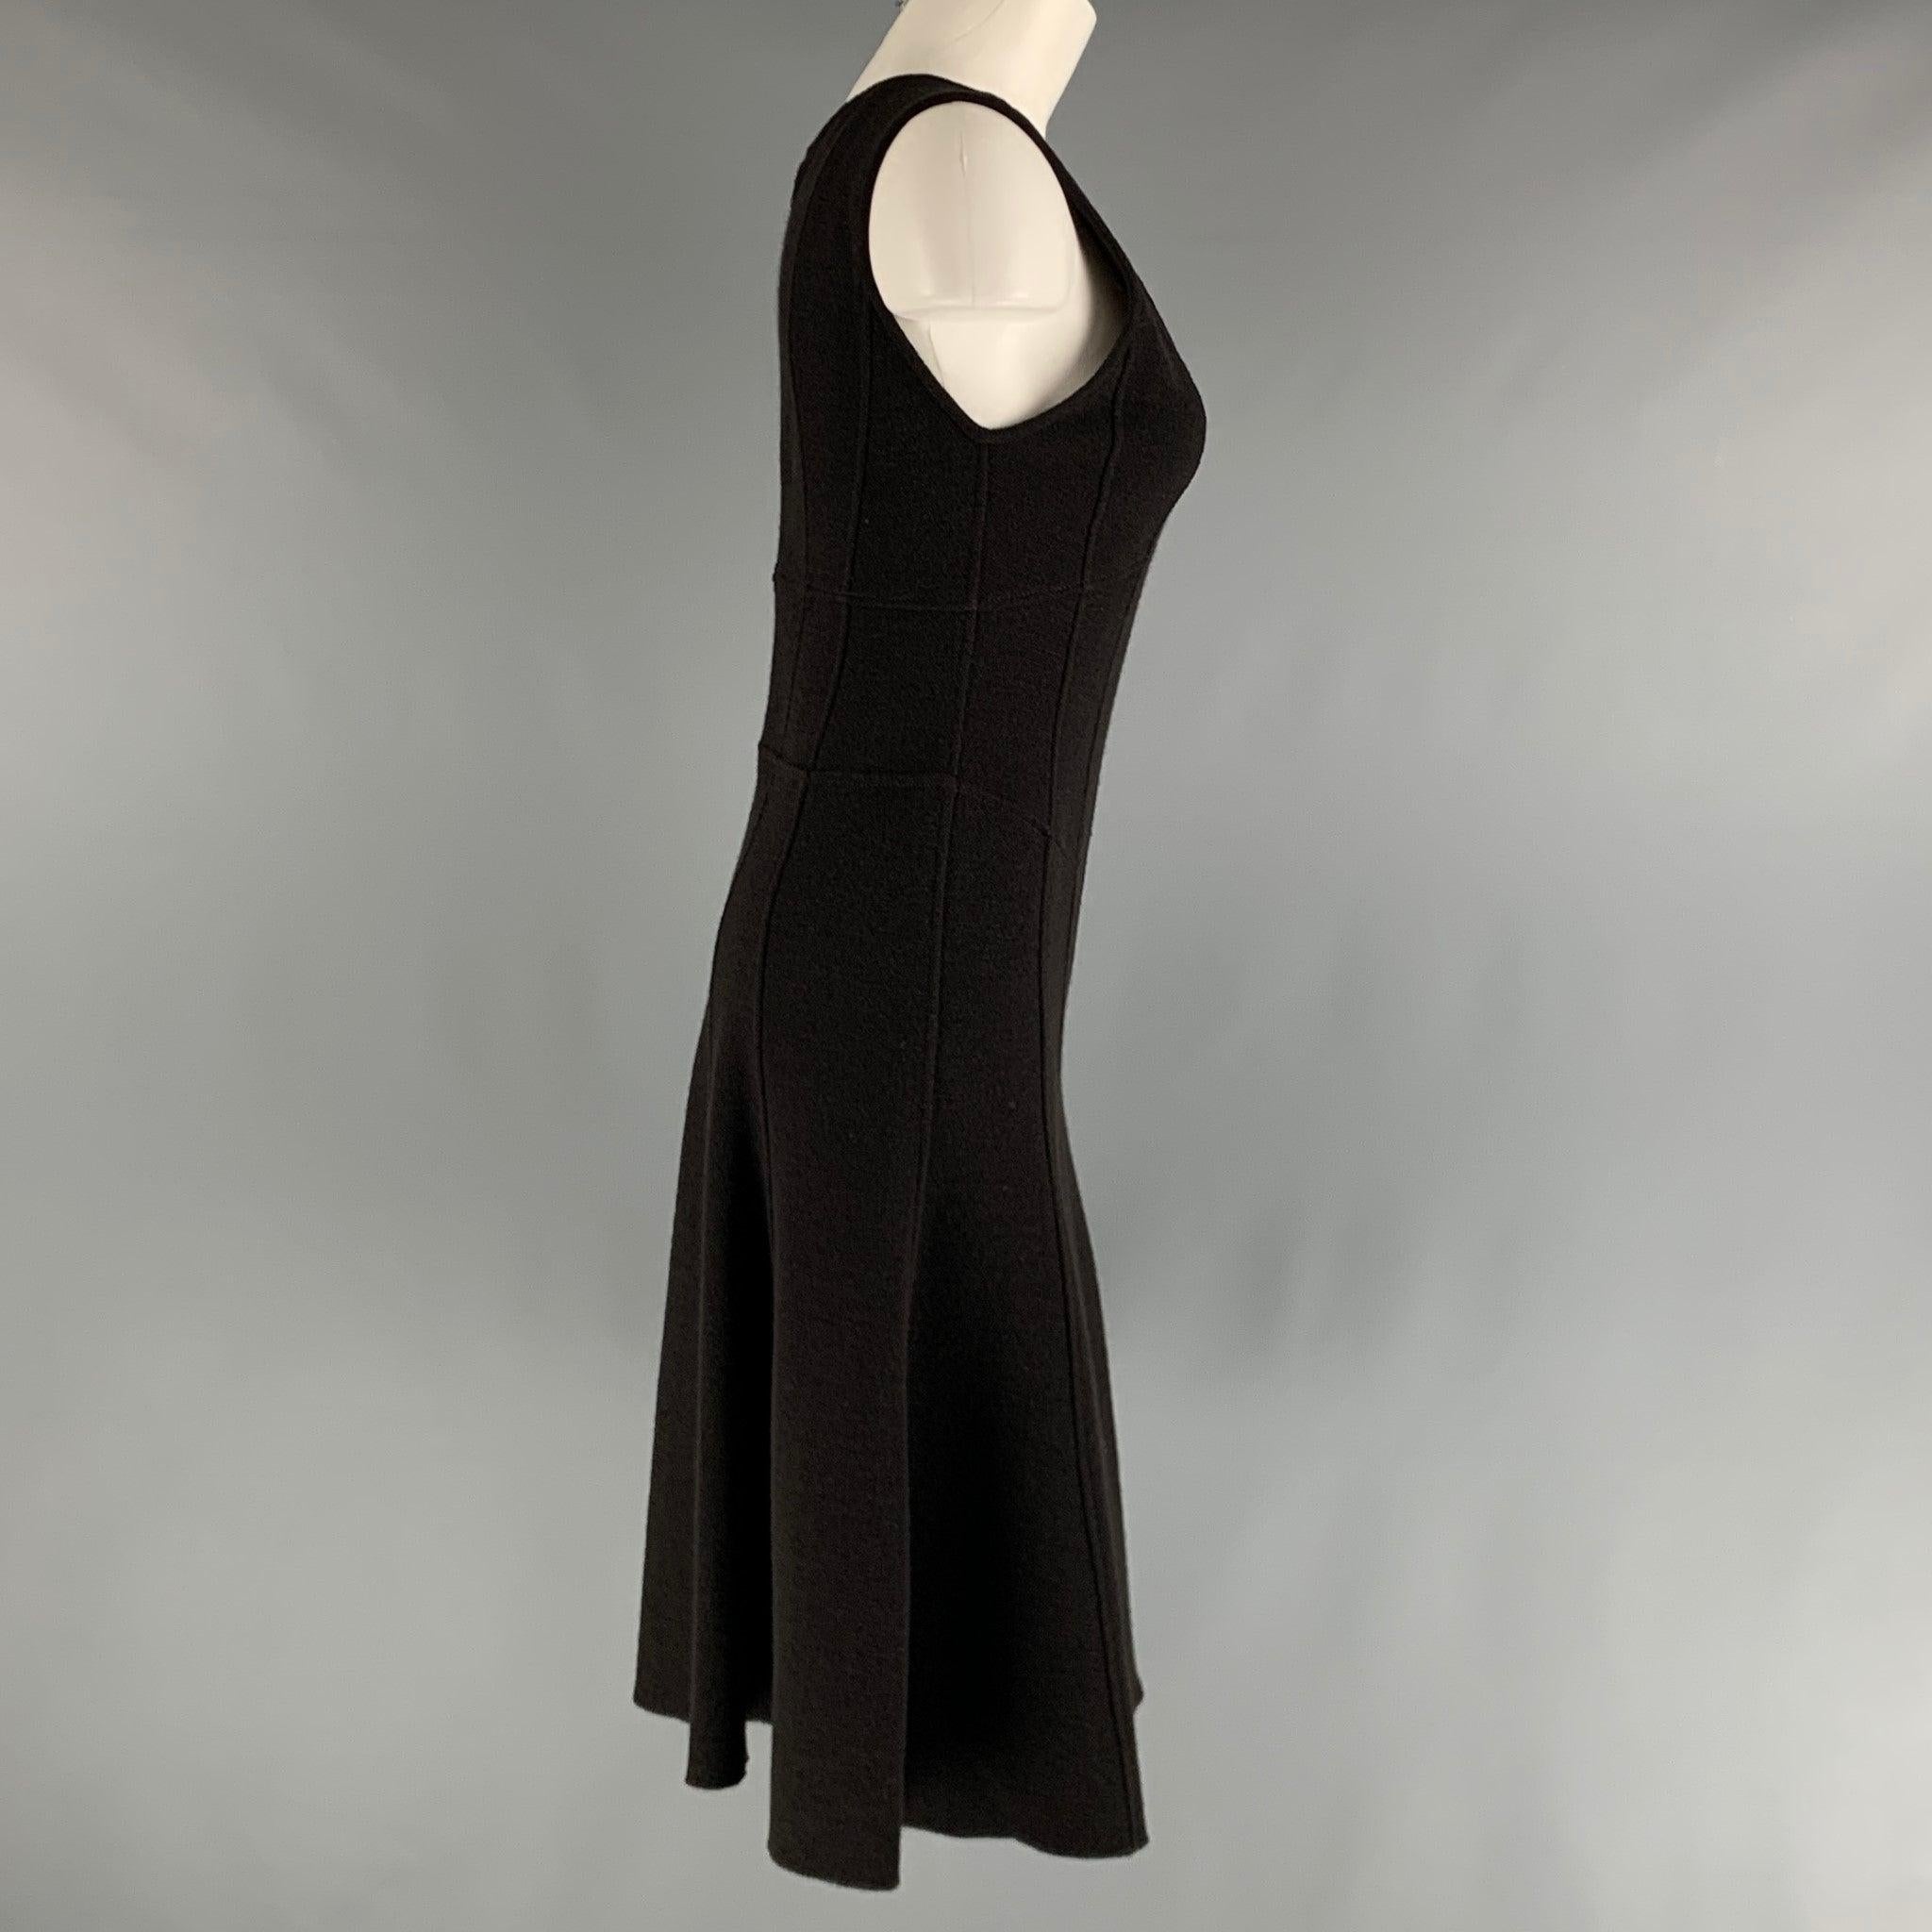 ARMANI COLLEZIONI dress comes in a black wool knit material featuring an a-line style, scoop neck, and a back zip up closure. Made in Italy.Very Good Pre- Owned Condition. 

Marked:  4 

Measurements: 
 
Shoulder: 14 inches Bust: 32 inches Waist: 29